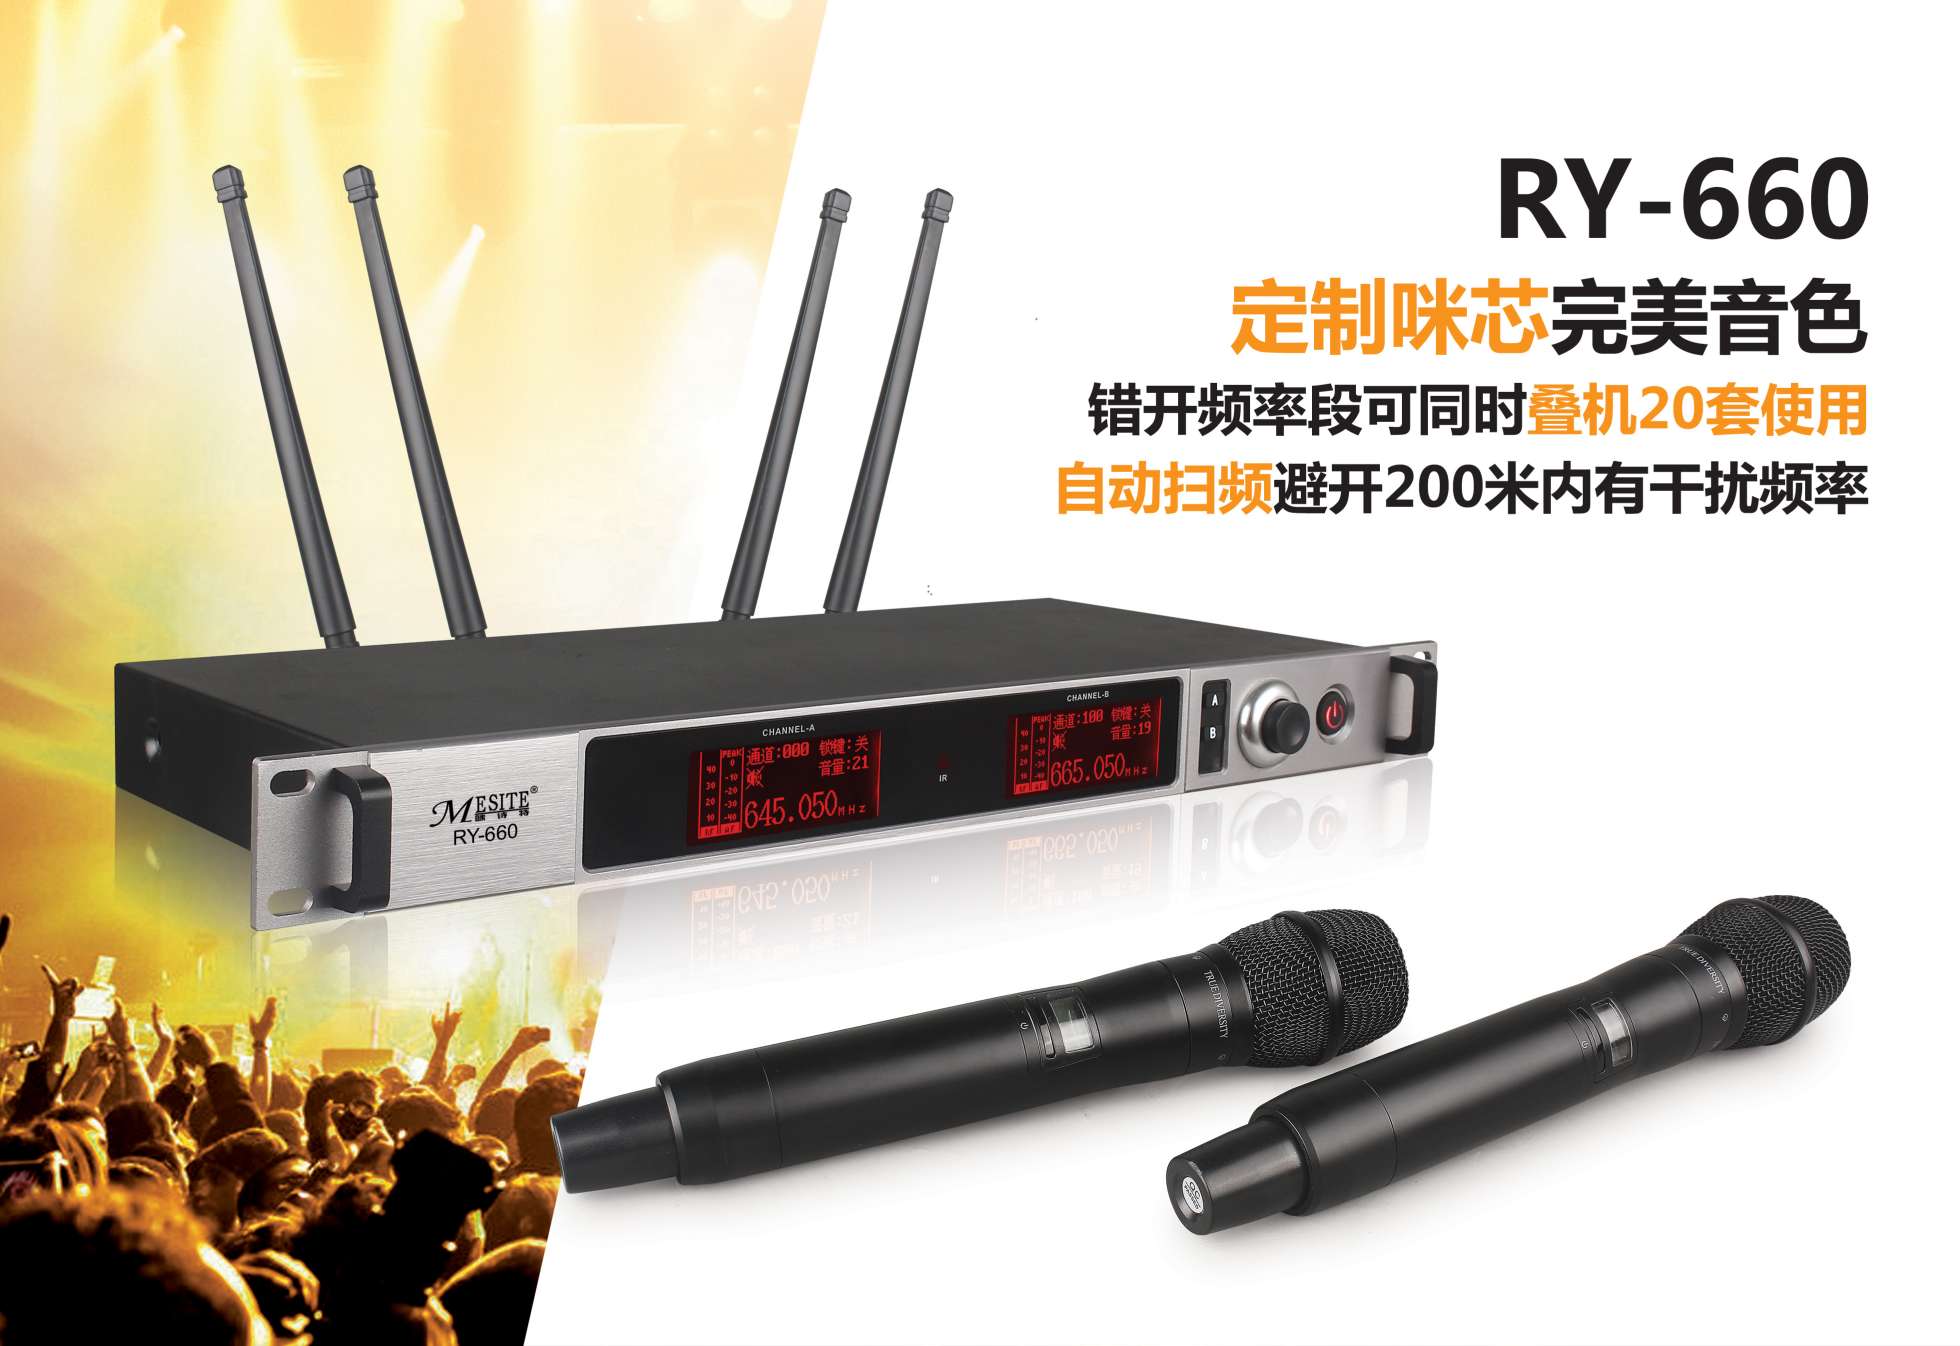 RY-660 A dragging two-true diversity handheld